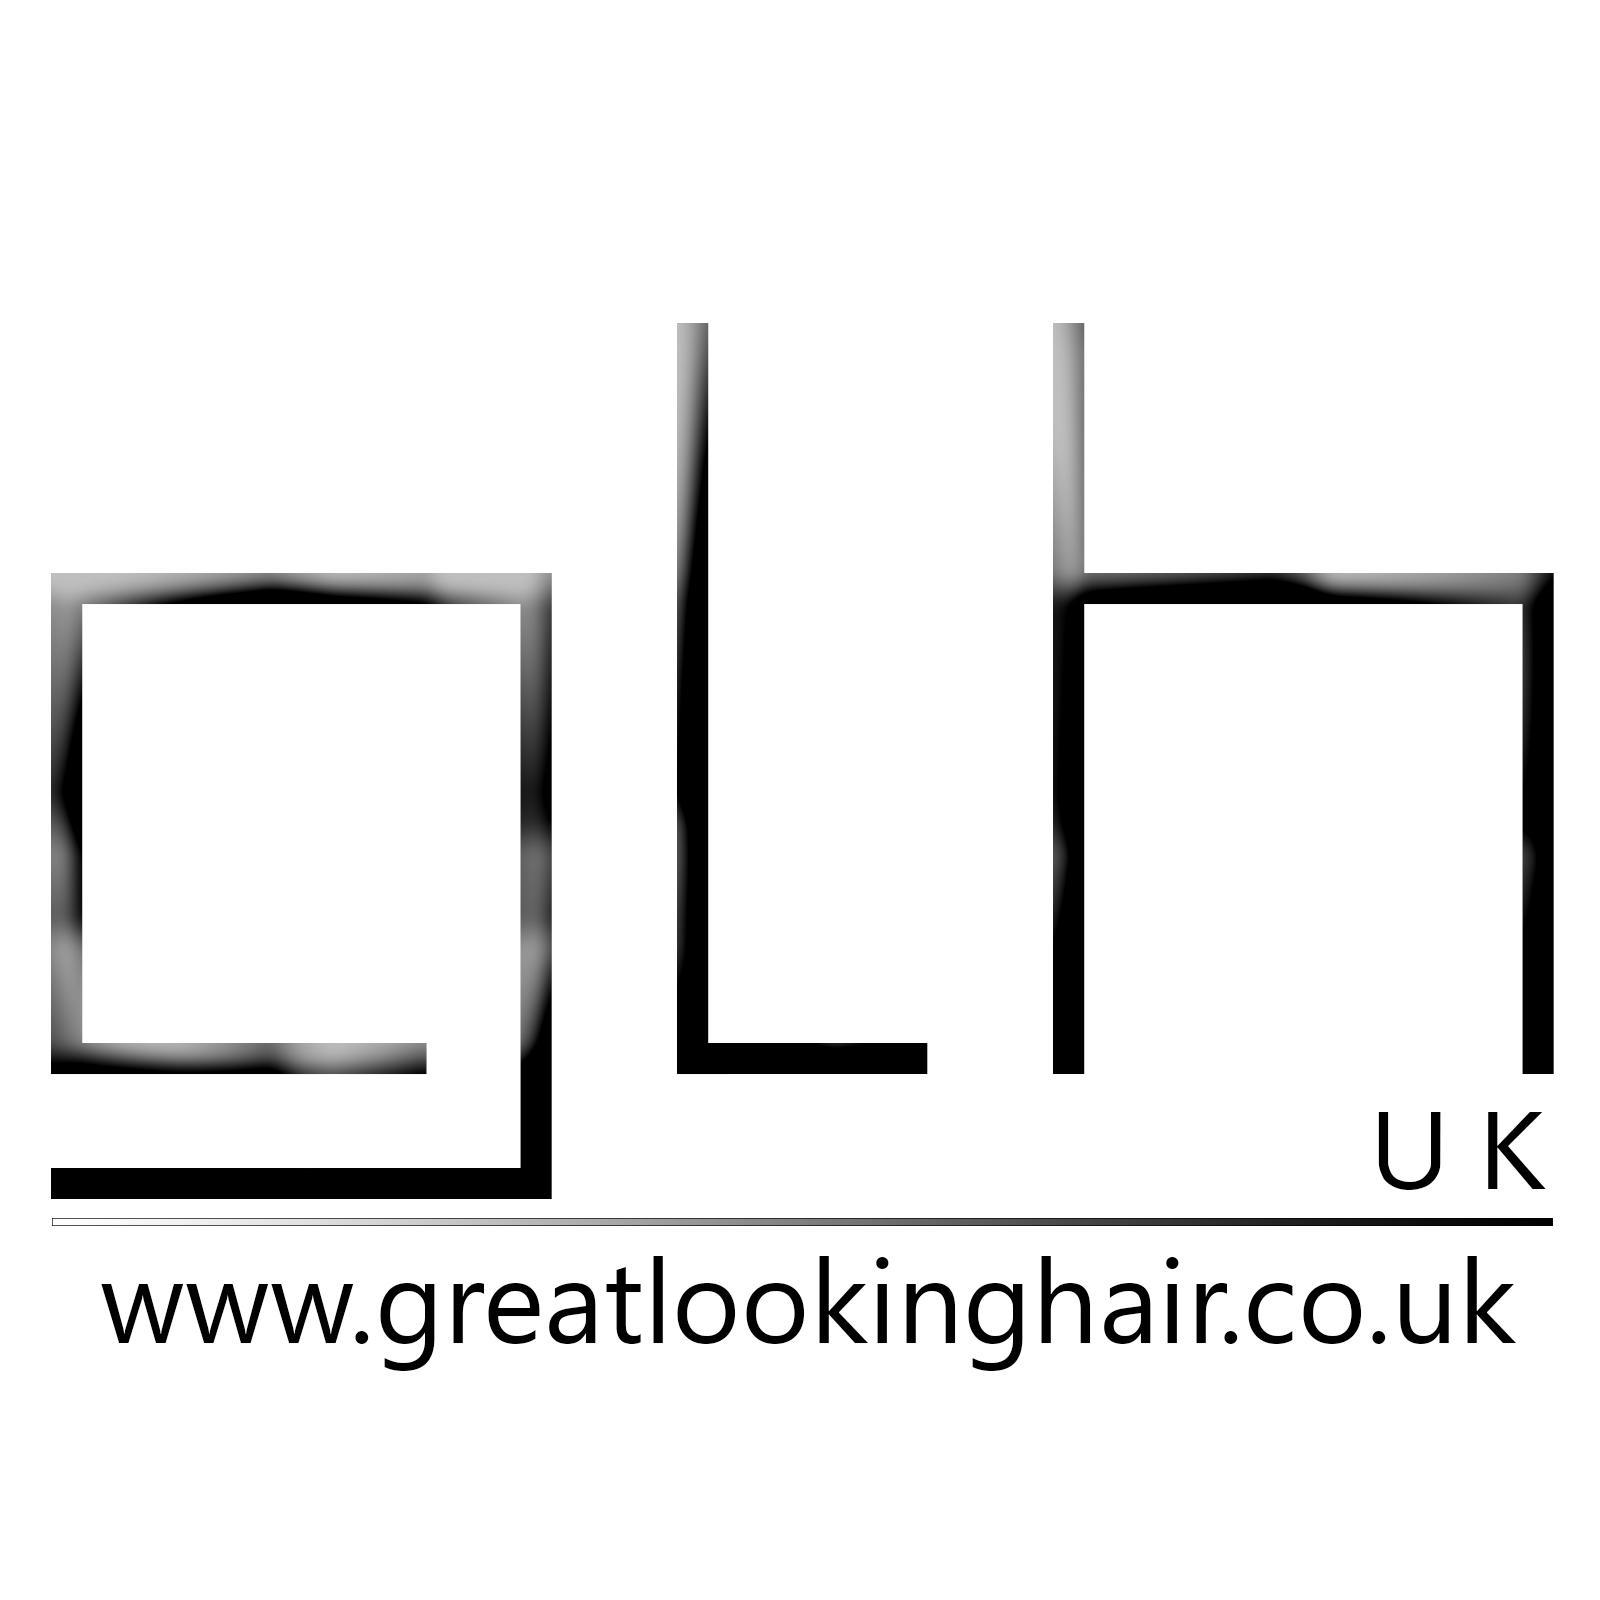 Hair replacement, wigs and hair extensions. We also offer certified training around the UK!